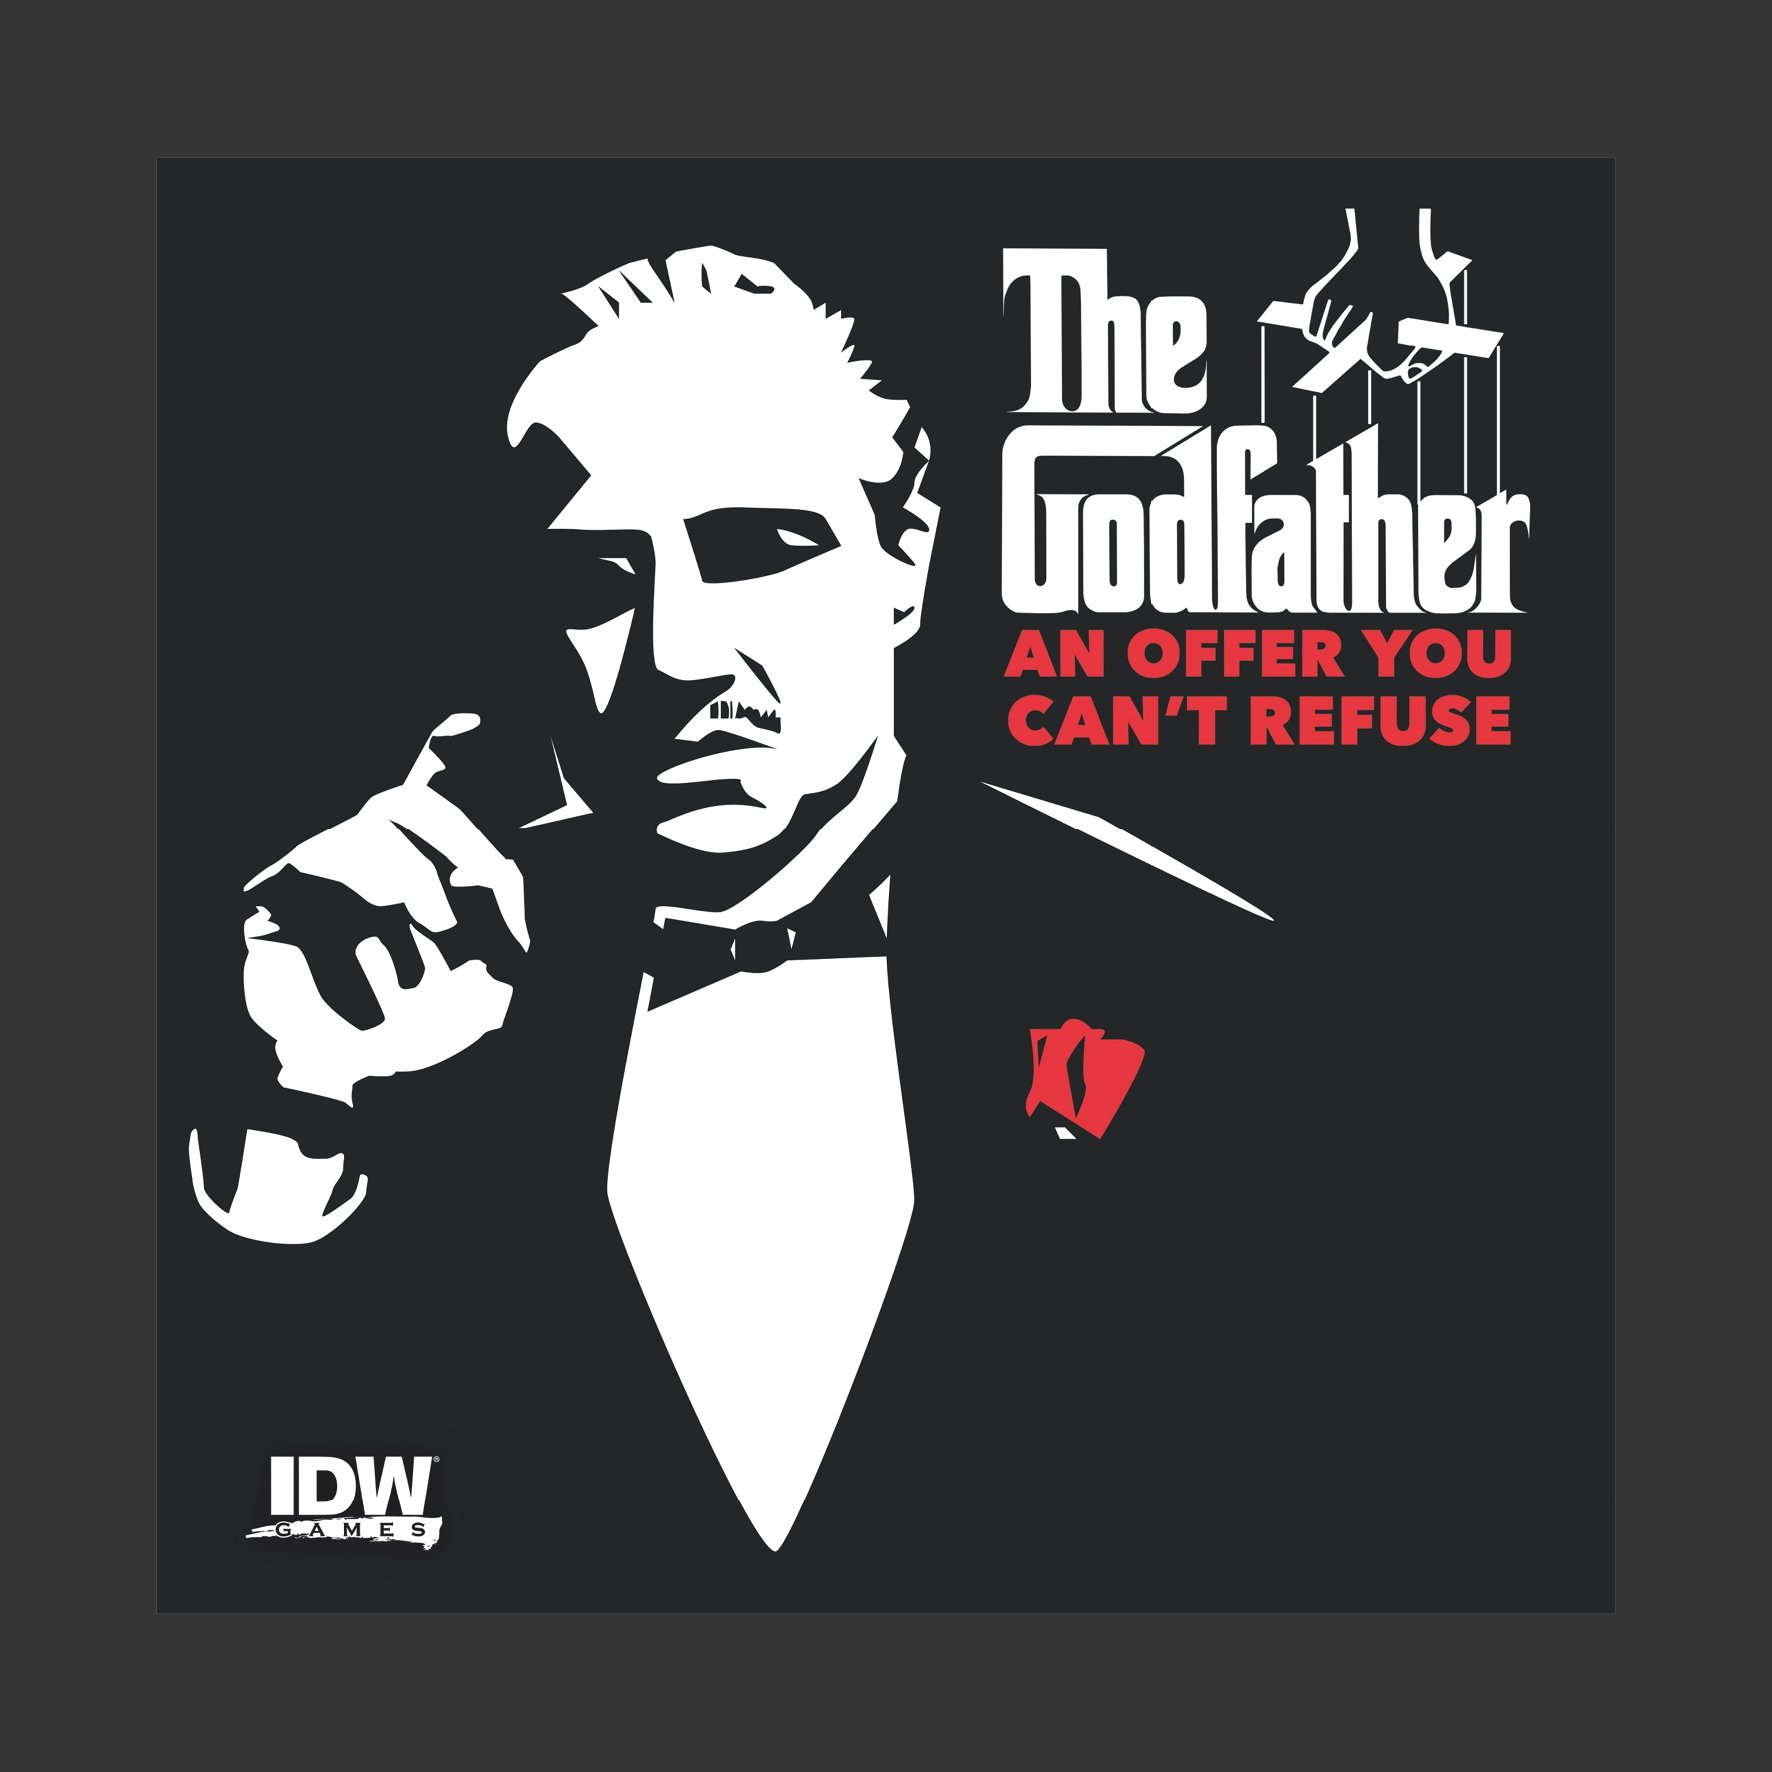 The Godfather: An Offer You Can't Refuse